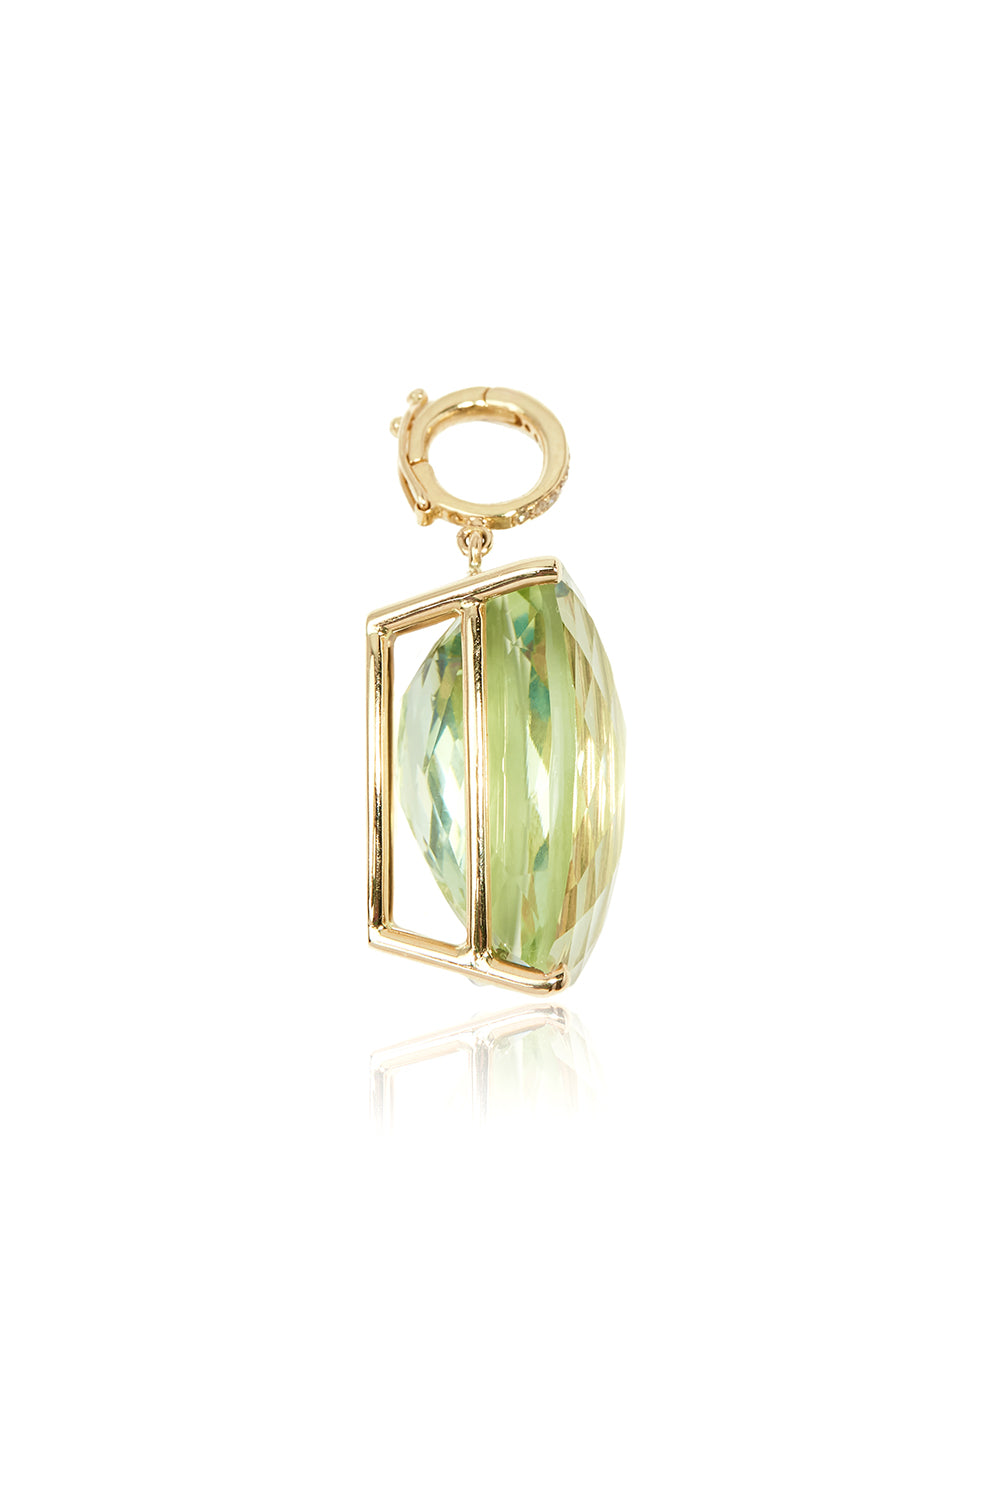 L.A. STEIN Large Diamond Green Amethyst Pendant in Yellow Gold